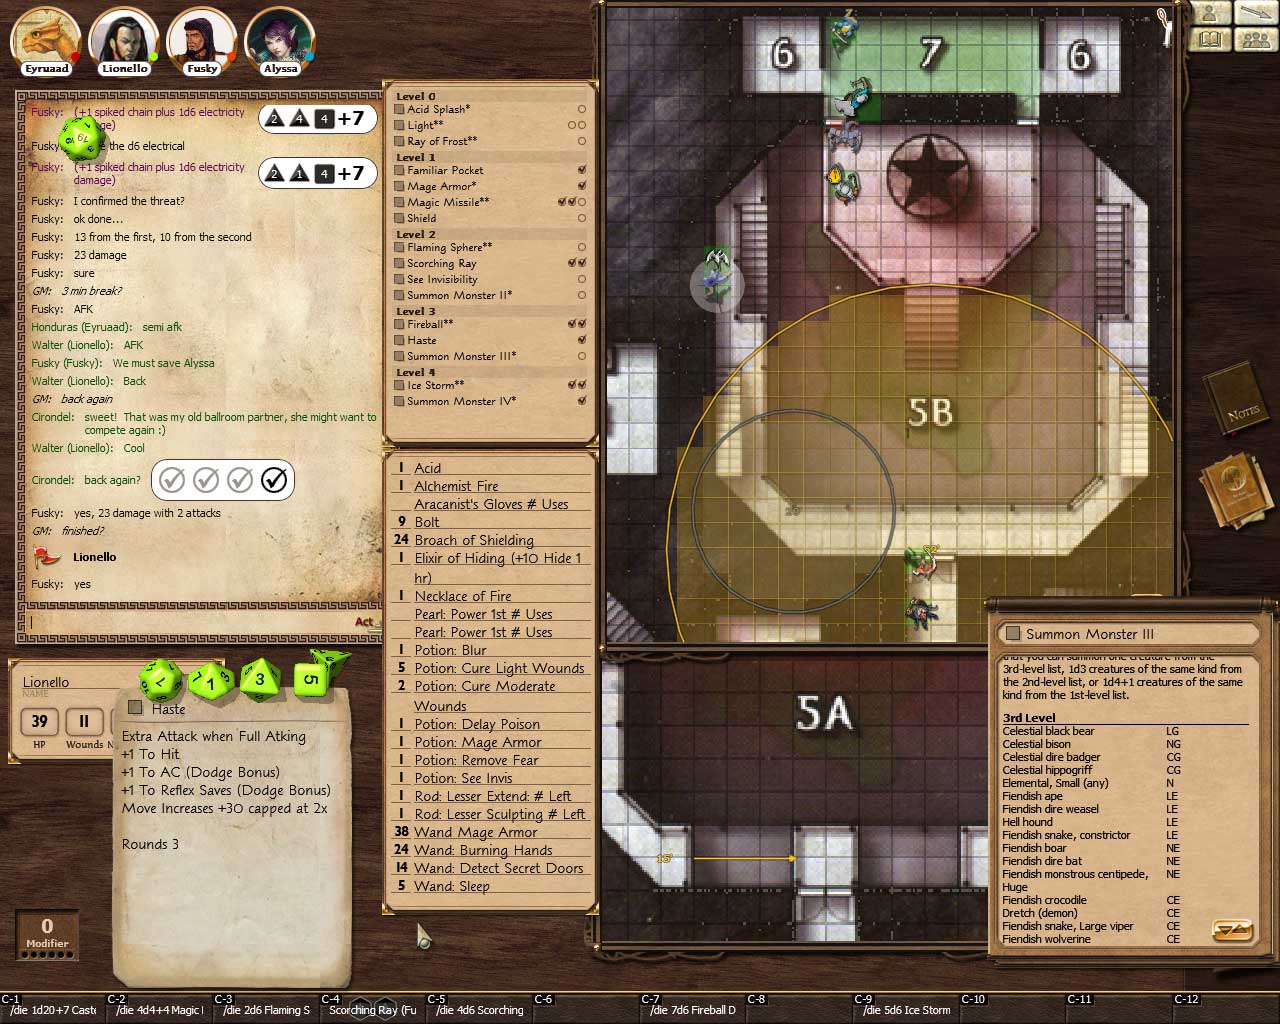 can you buy the fantasy grounds ultimate upgrade for steam through the website